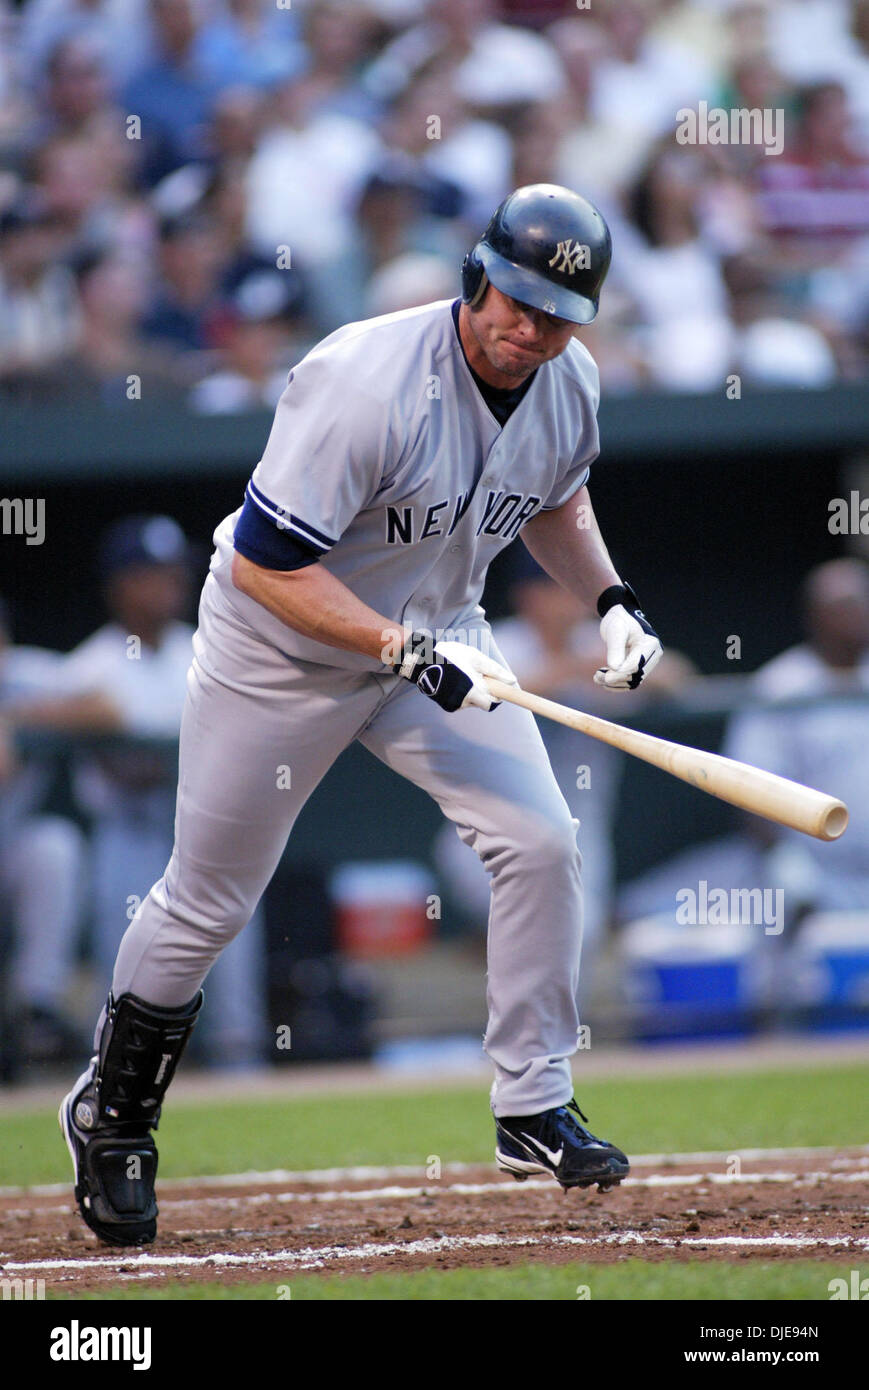 Jun 22, 2004; Baltimore, MD, USA; Yankees' JASON GIAMBI reacts to flying  out in the 2nd inning during the New York Yankees v. Baltimore Orioles  baseball game, Tuesday June 22, 2004 at